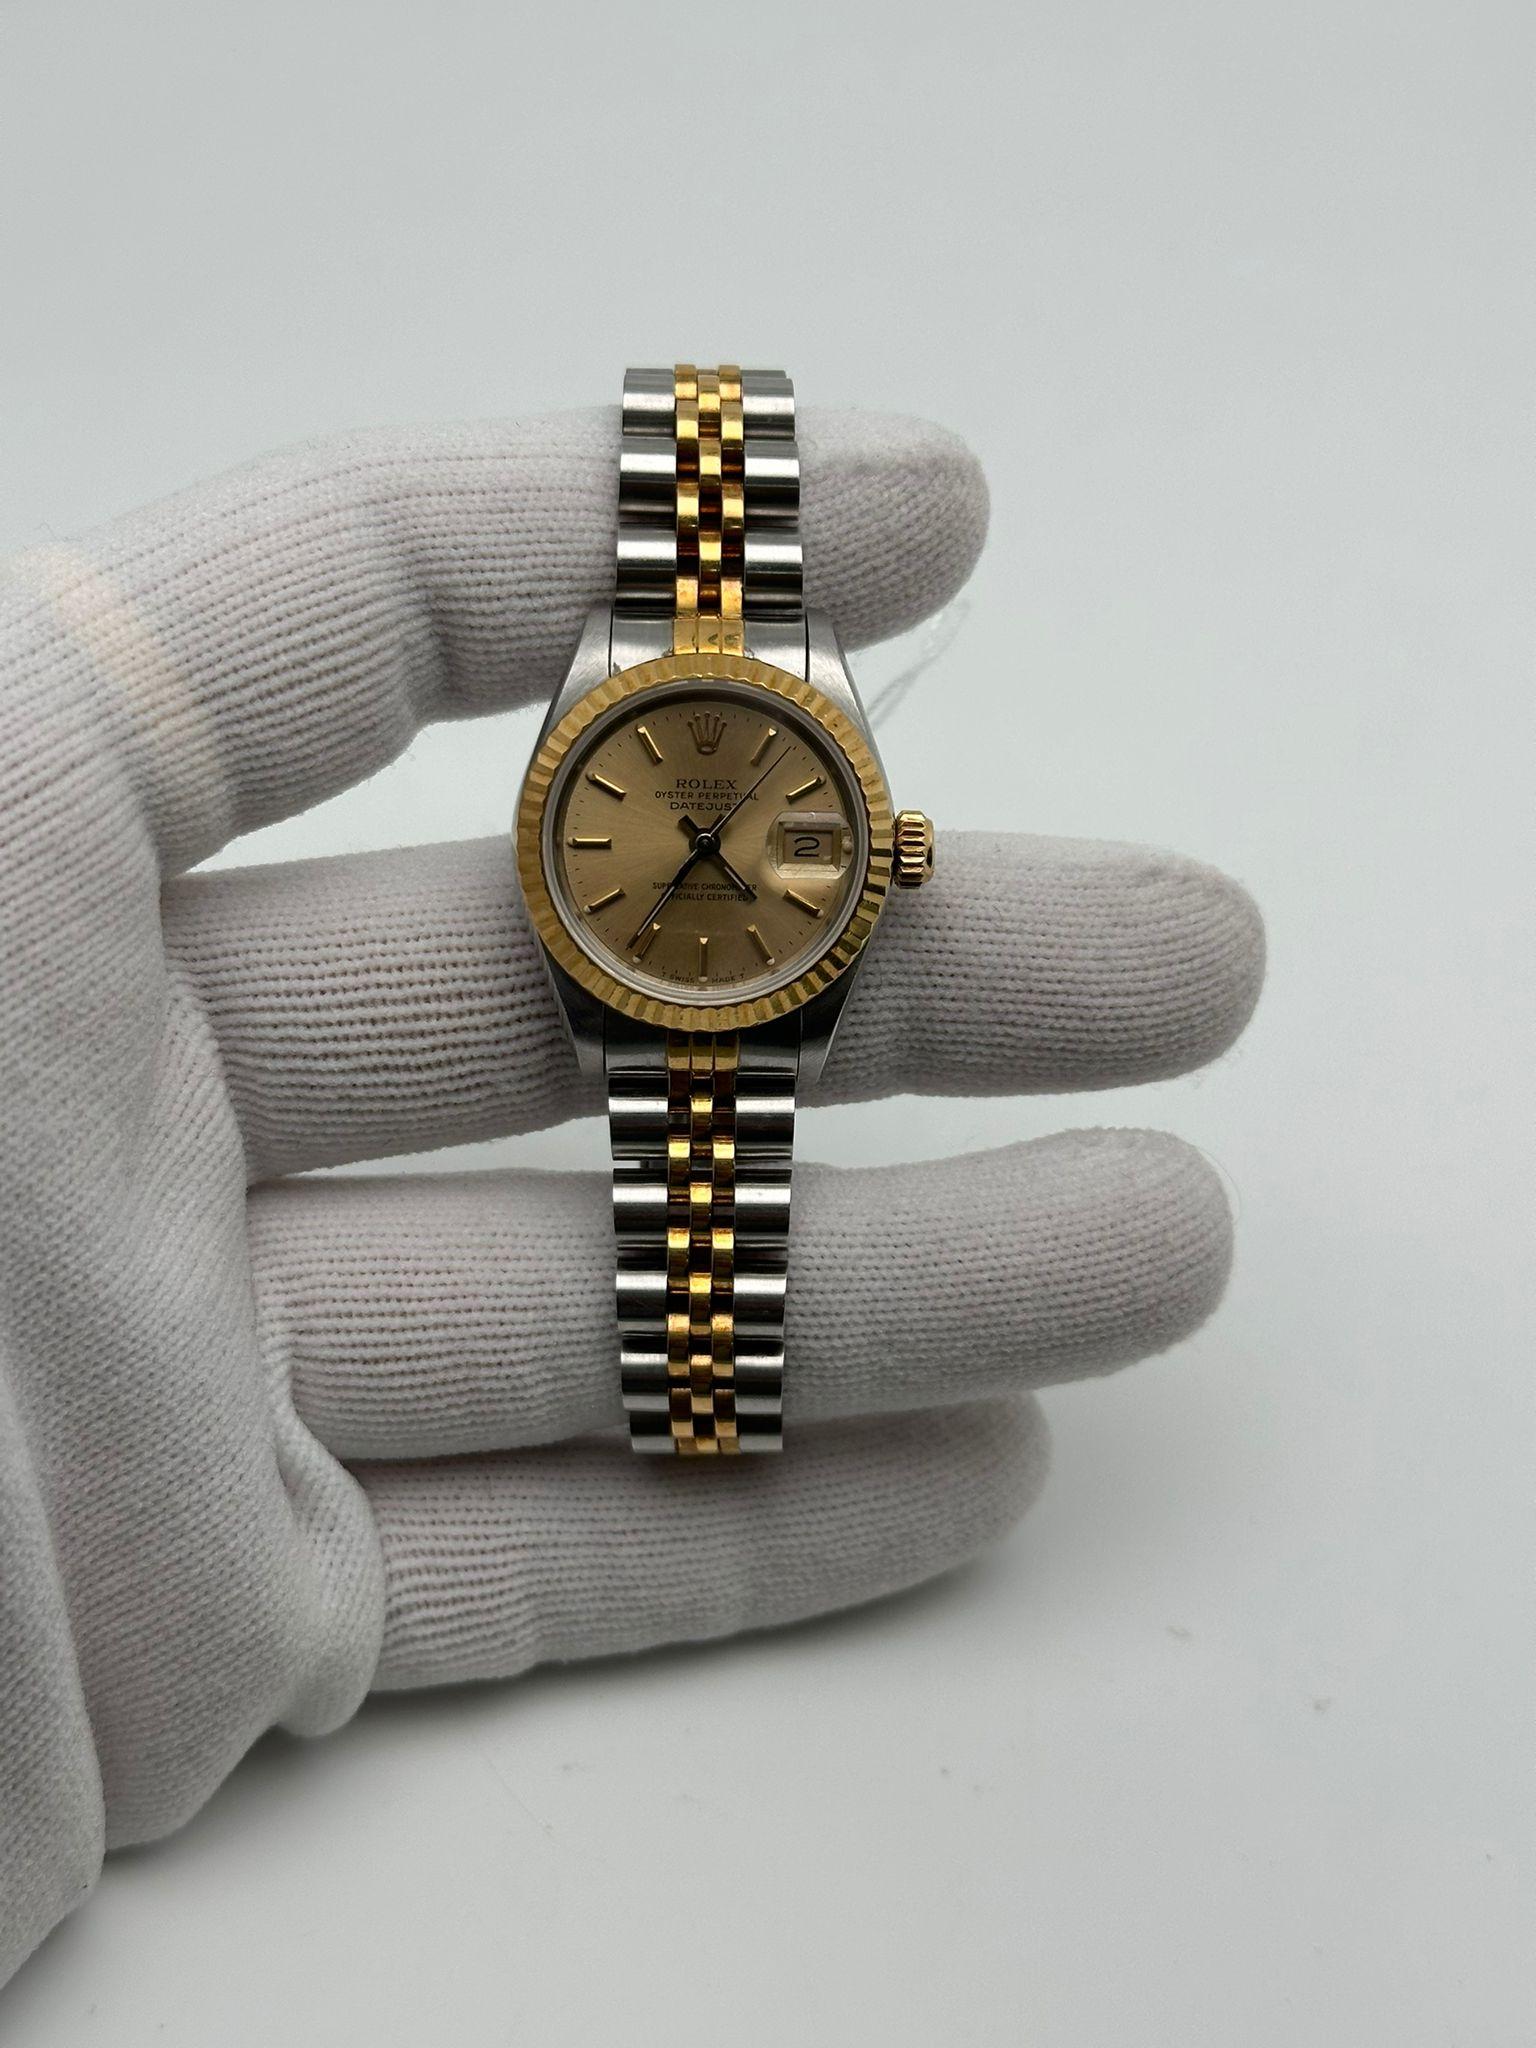 Rolex Datejust 18k Yellow Gold Holes Case Champagne Dial Ladies Watch 69173 6